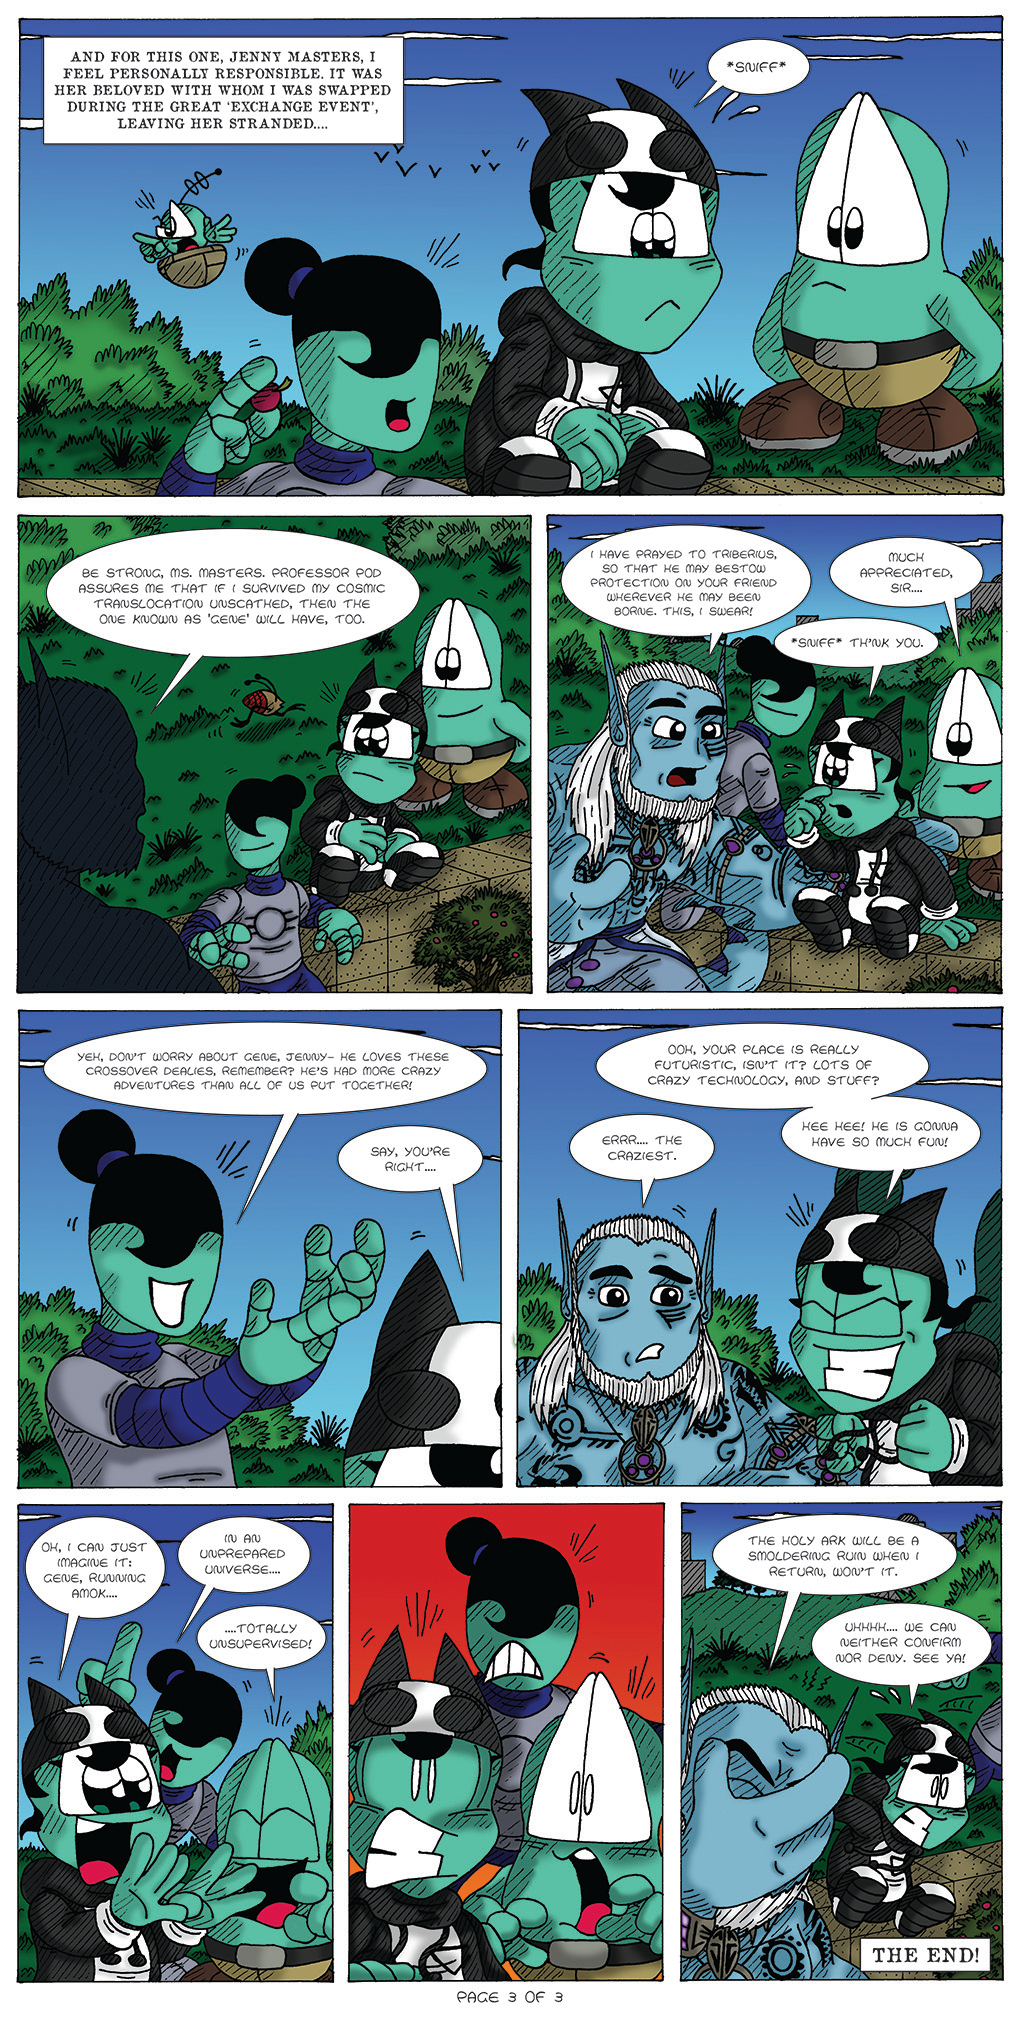 Arkian to Cosmos Part 3 by Cartoonist_at_Large